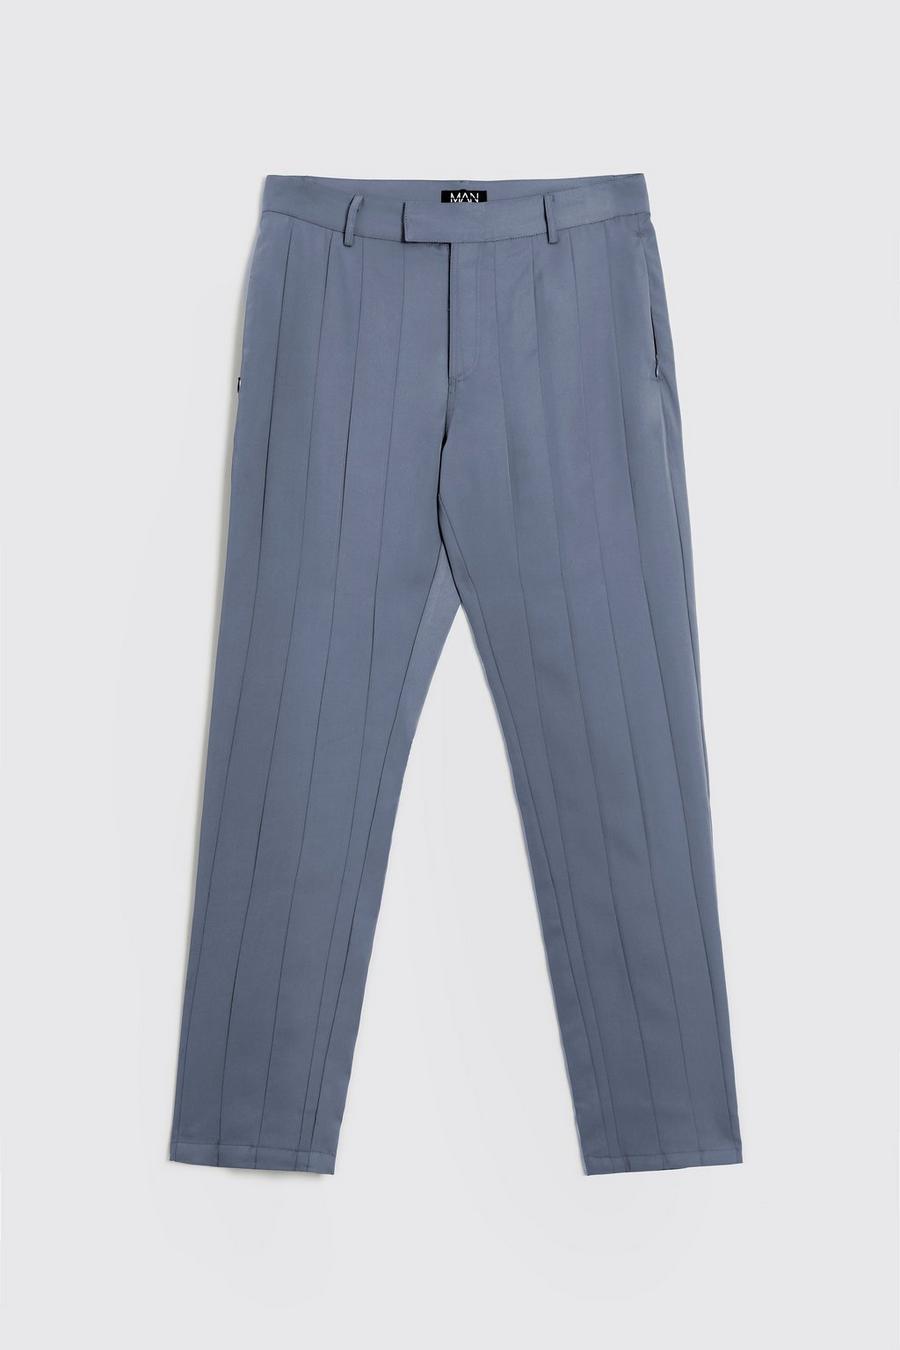 Grey Slim Fit Smart Pleated Trousers